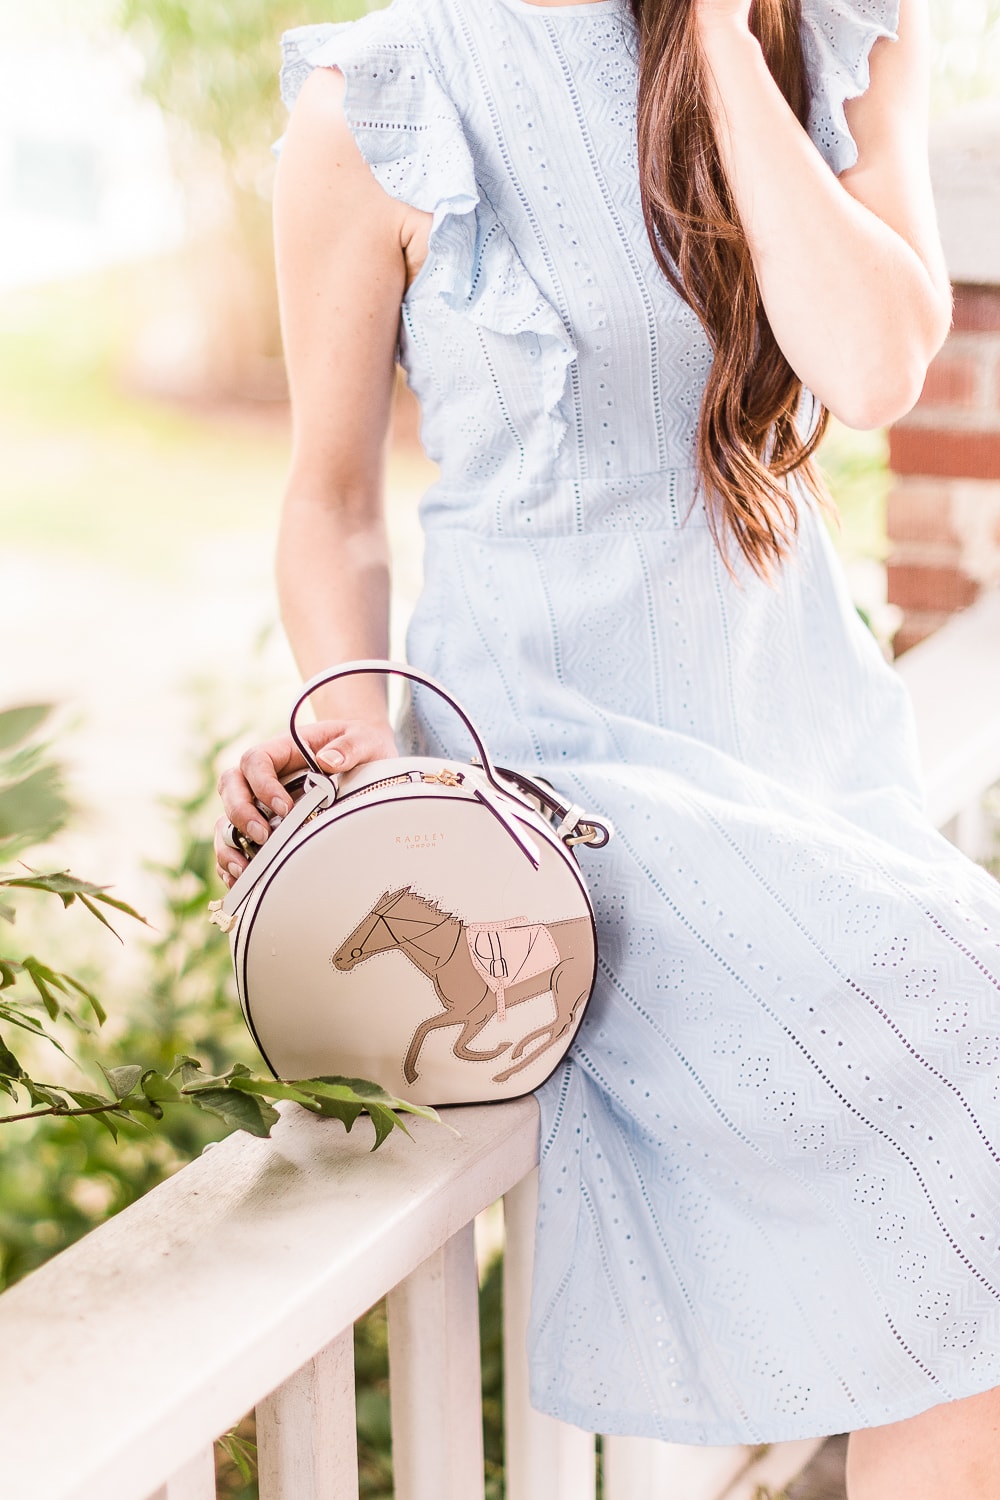 Radley London Royal Ascot Crossbody styled for Derby Day by southern blogger Stephanie Ziajka on Diary of a Debutante